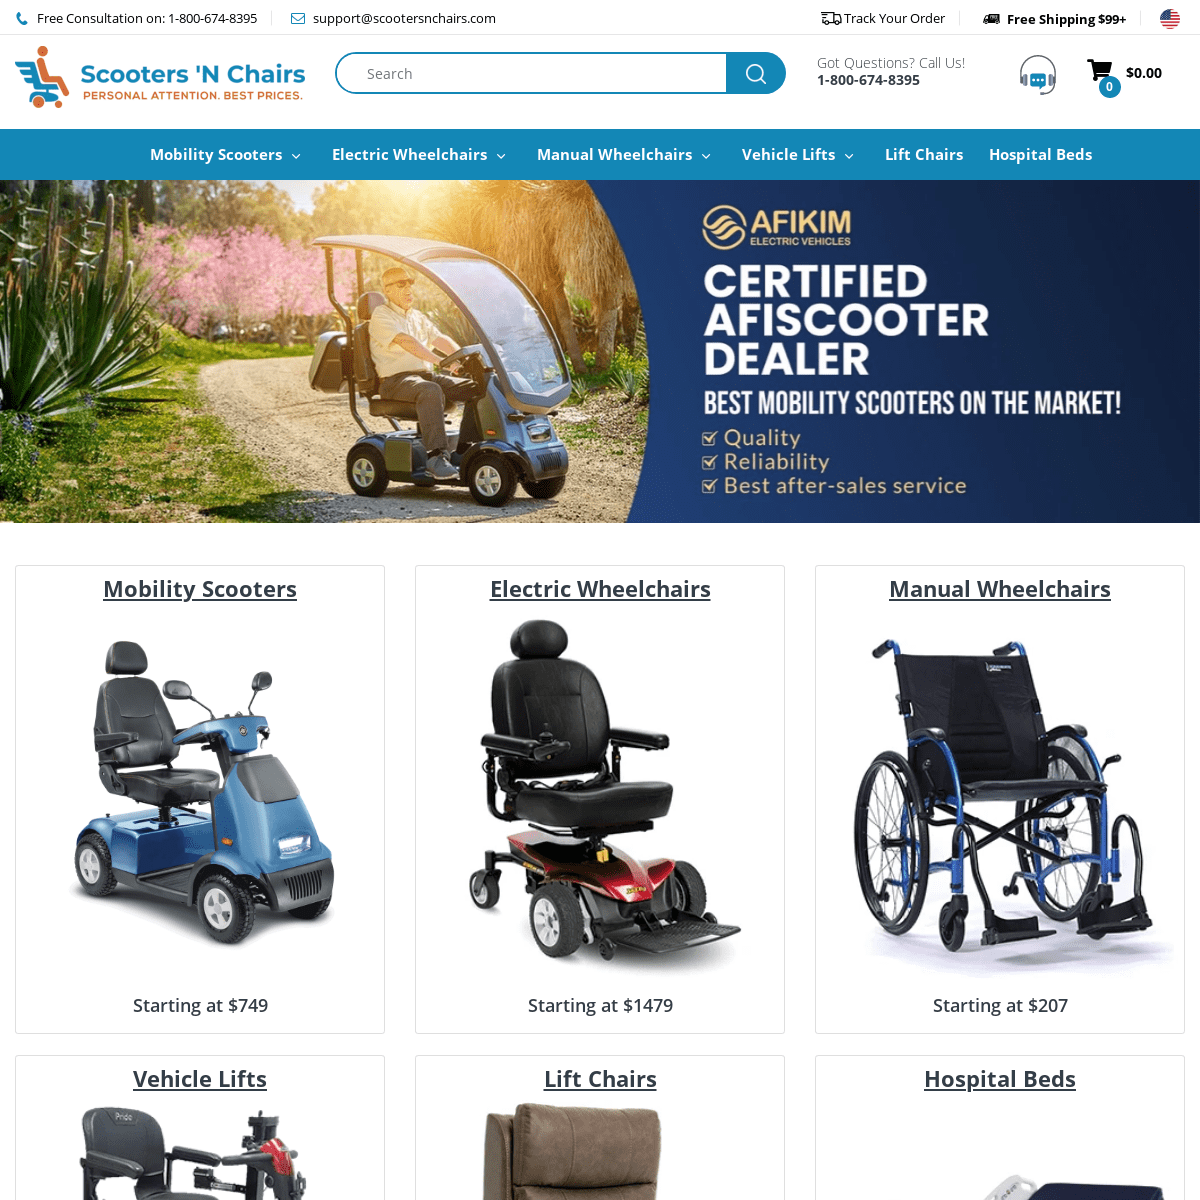 A complete backup of https://scootersnchairs.com